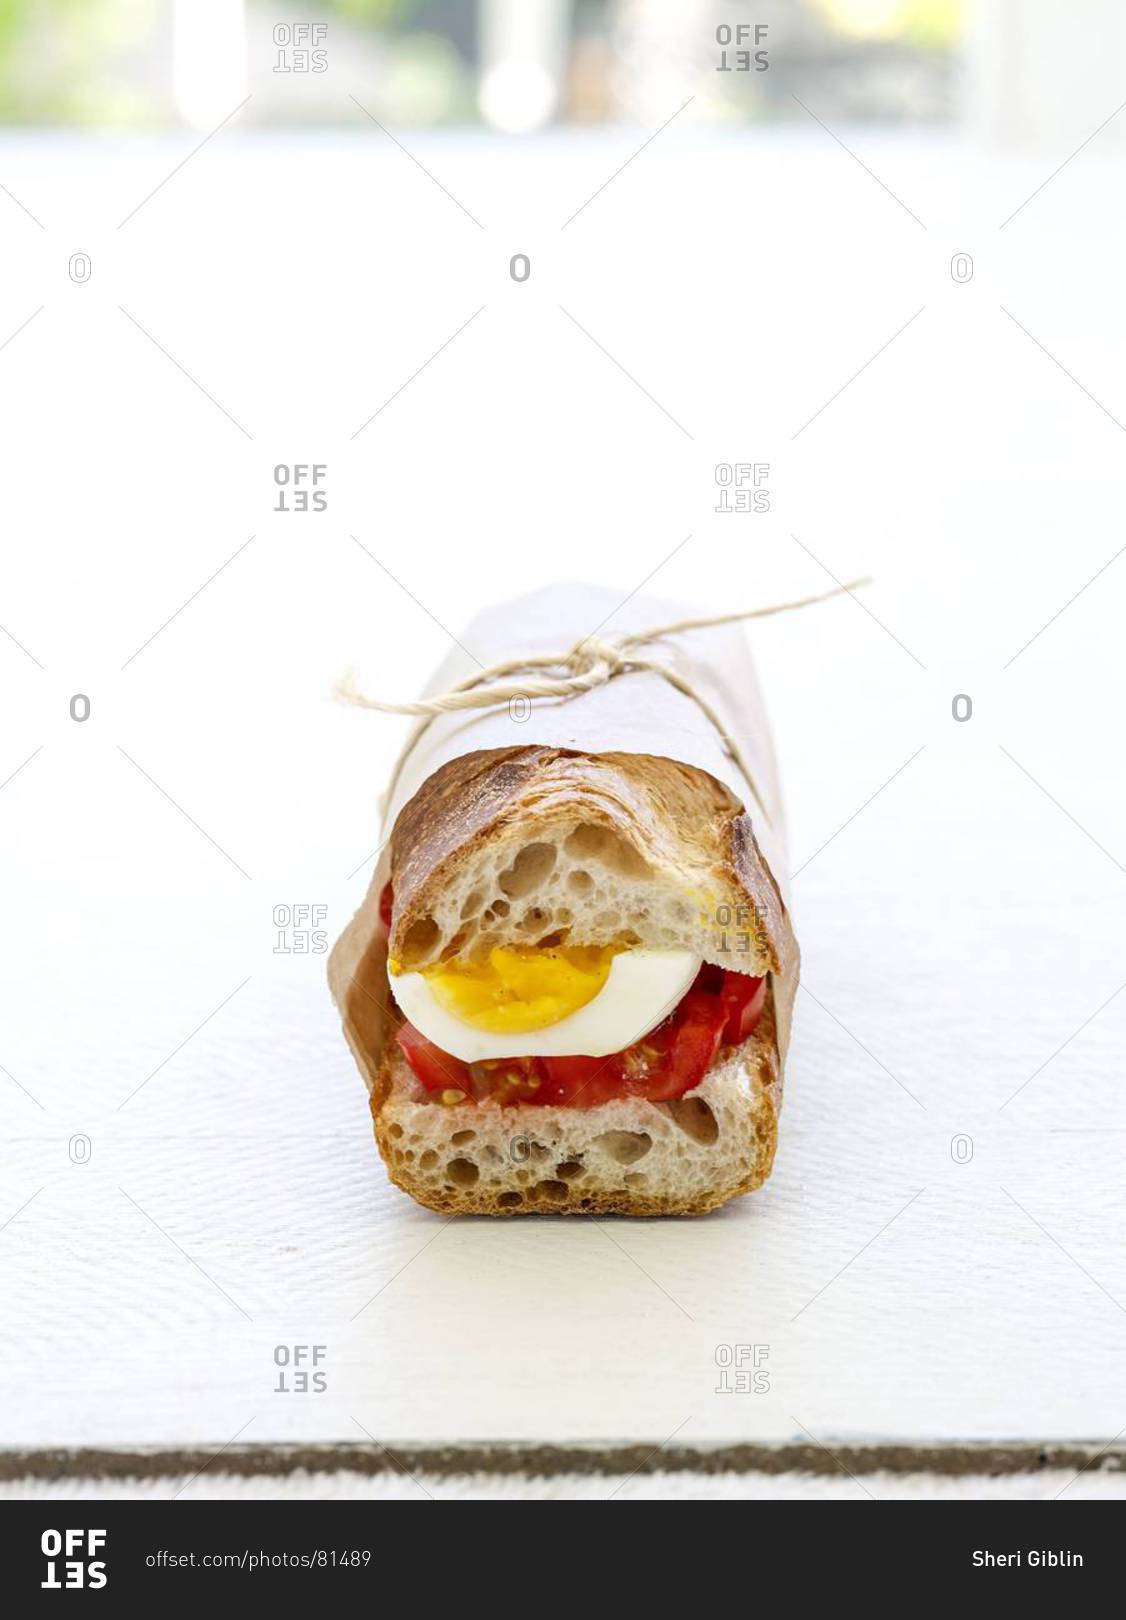 Boiled egg and tomato sandwich in French baguette, wrapped in wax paper